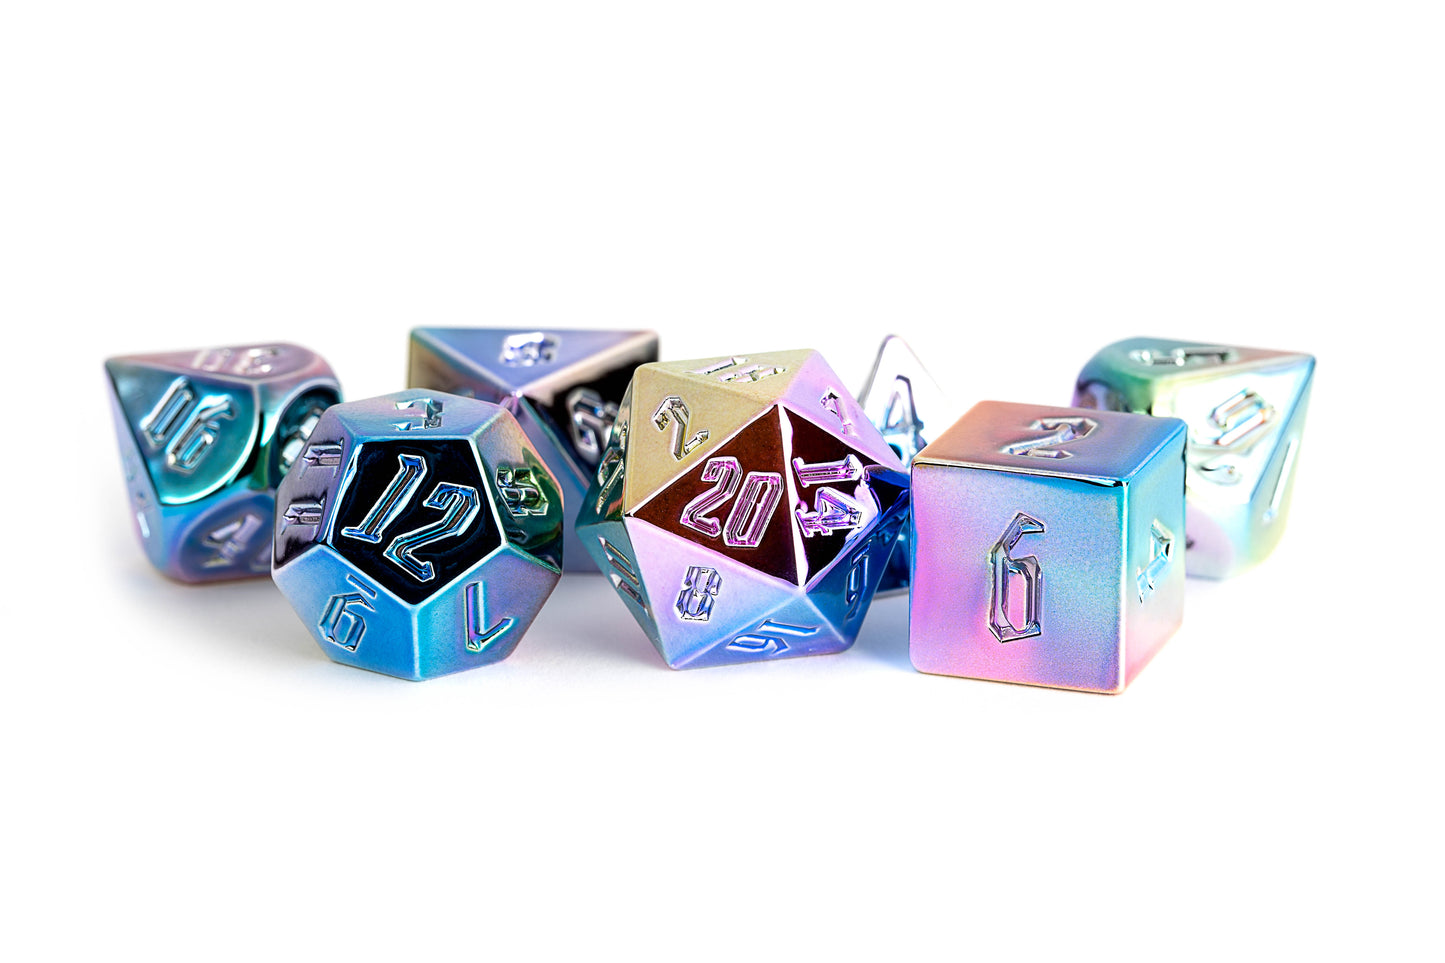 16mm Aluminum Plated Acrylic Poly Dice Set - Rainbow Aegis w/ White Numbers (7)